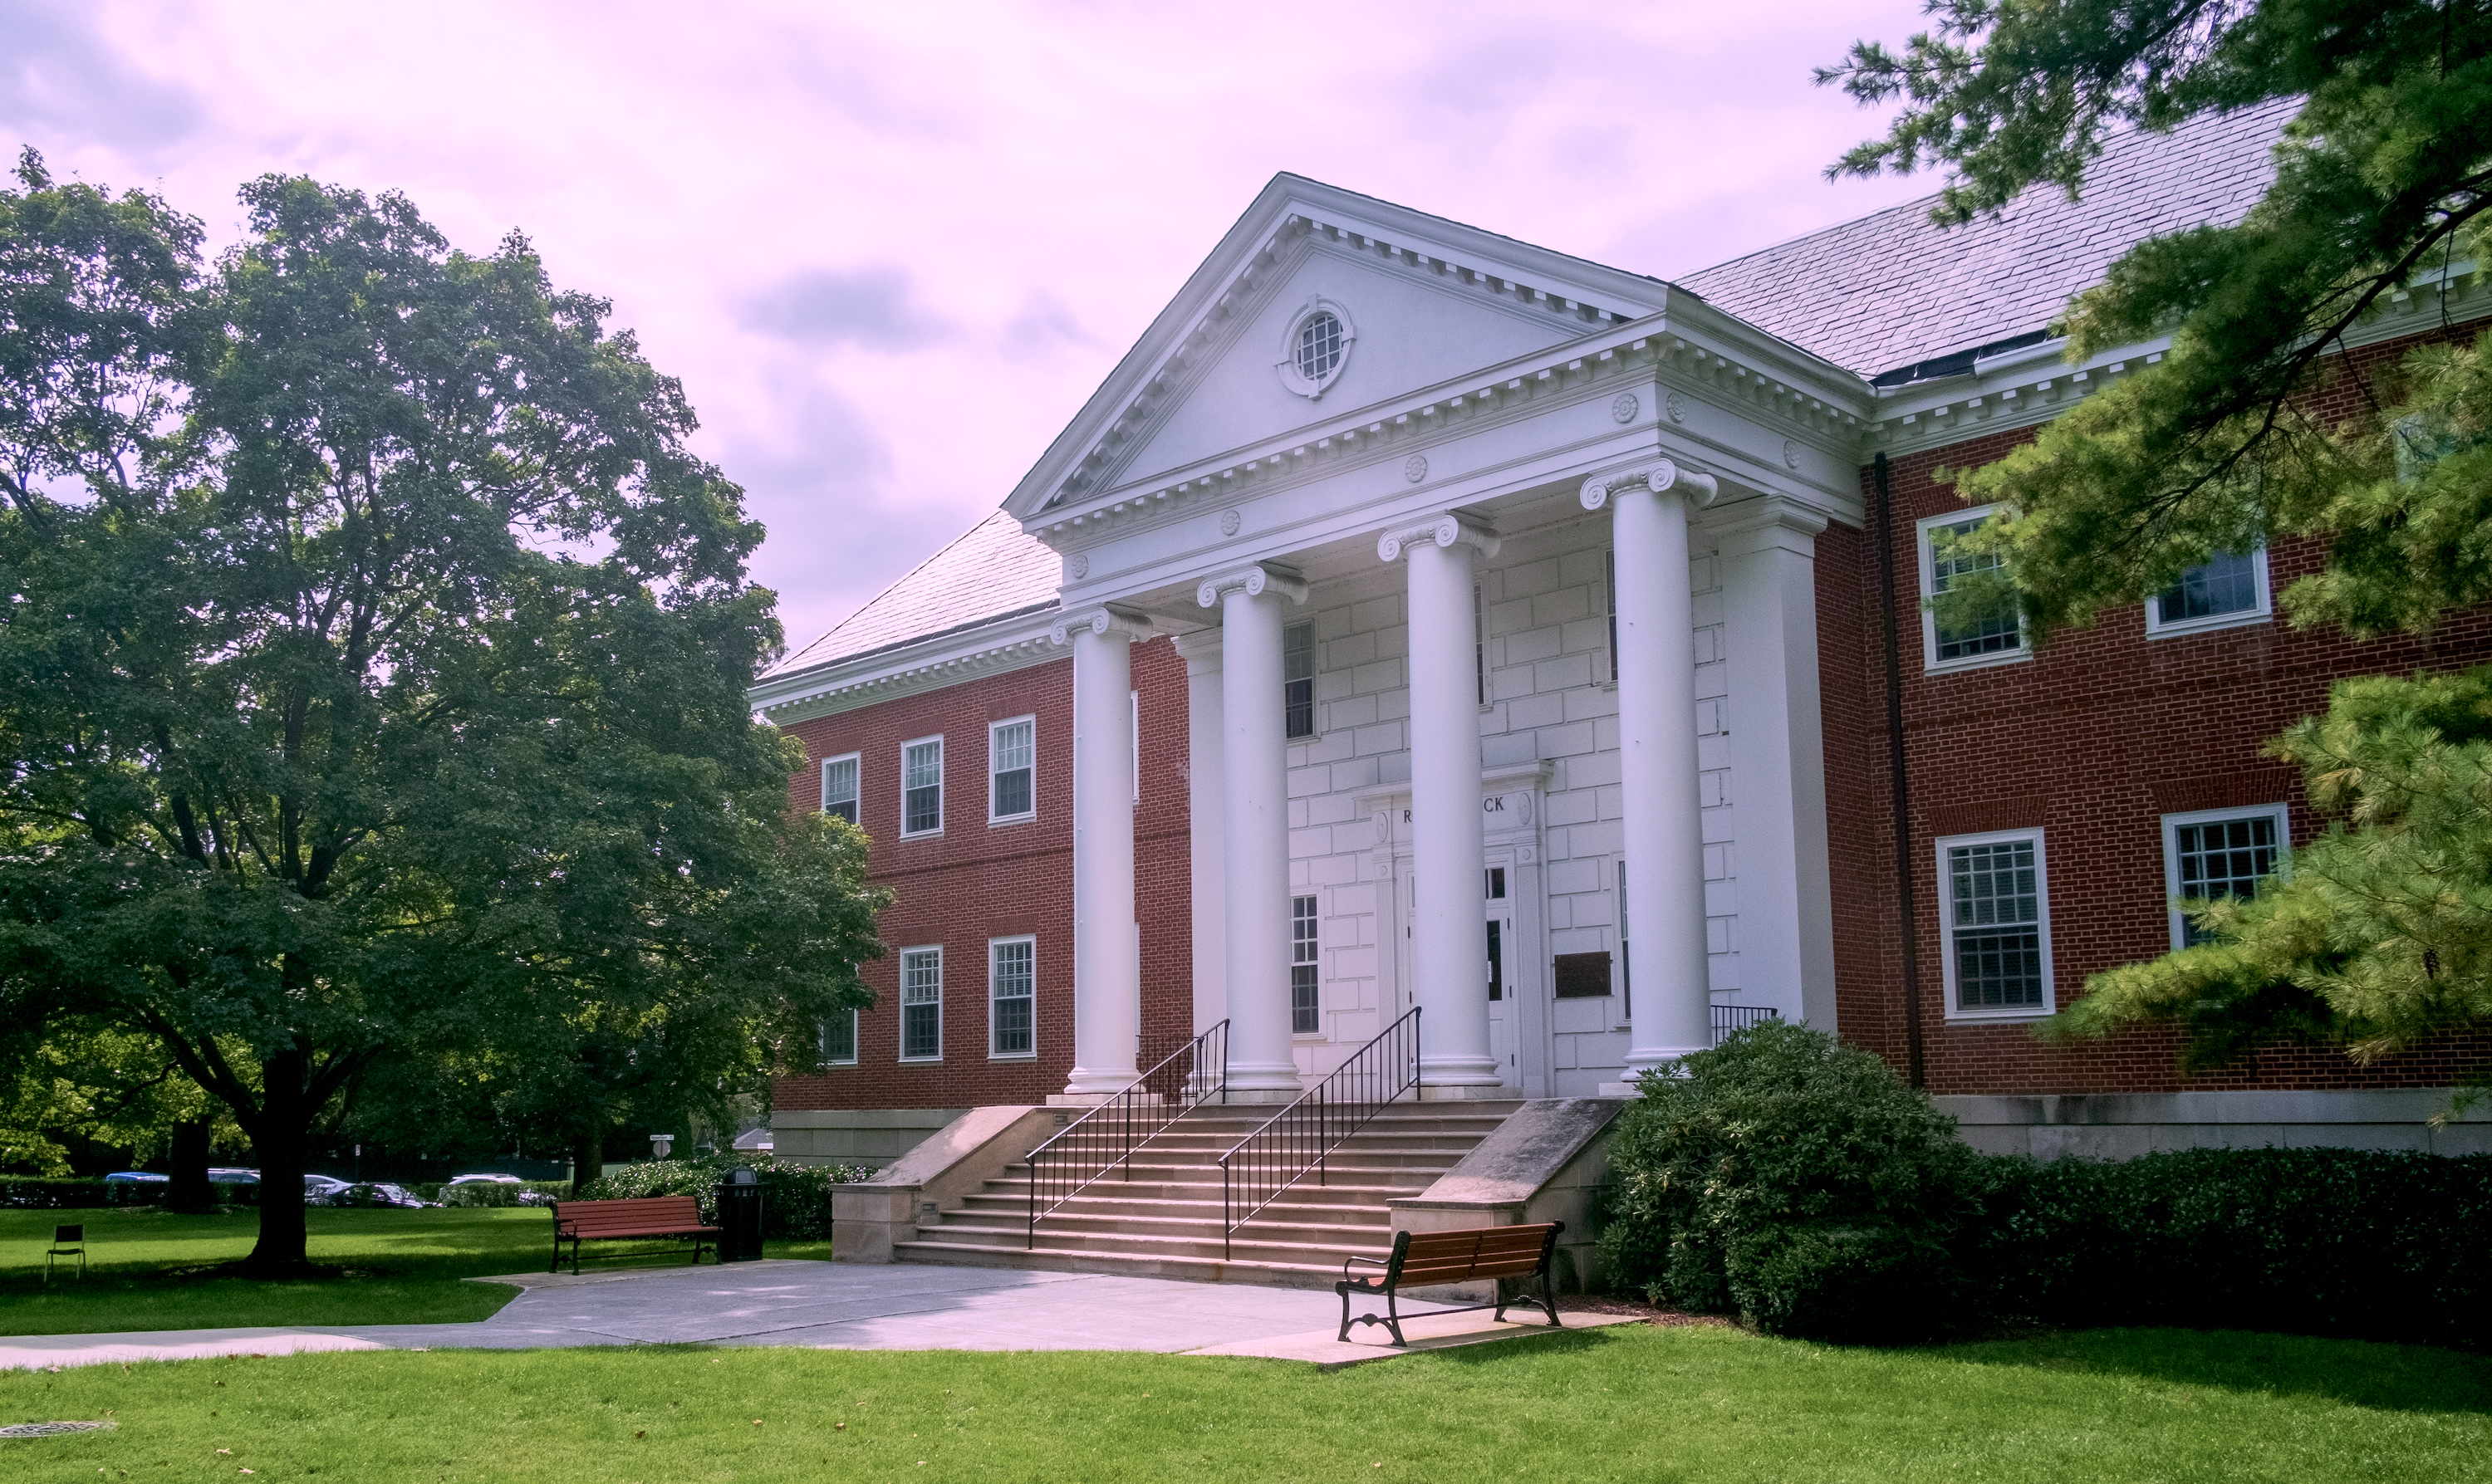 The front entrance of Rosenstock Hall, home to the George B. Delaplaine School of Business